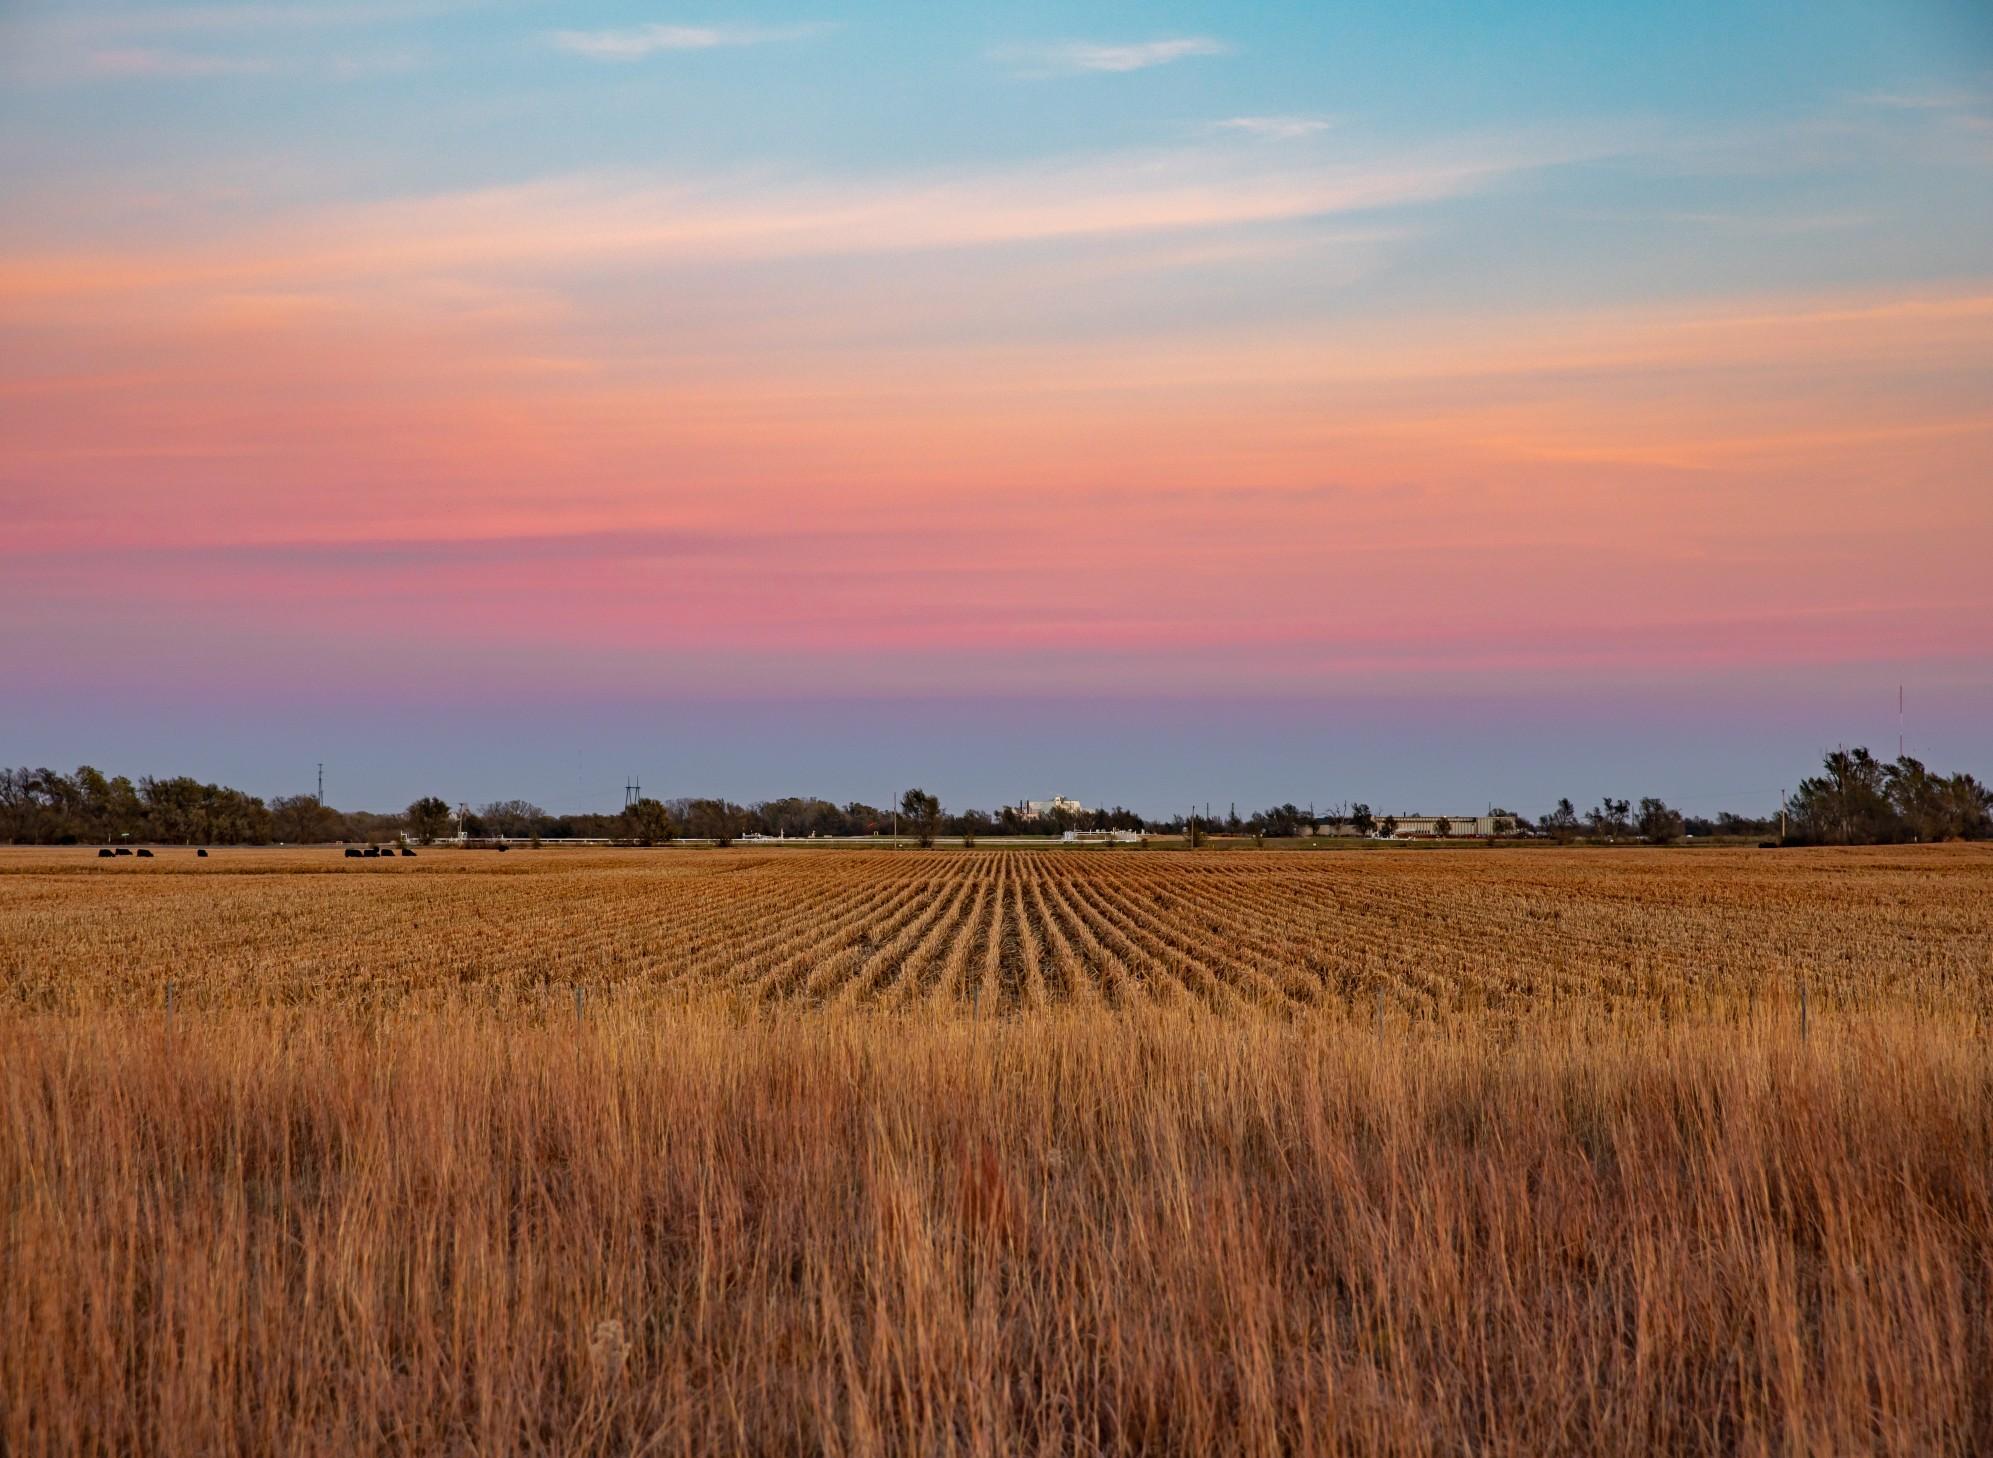 Sunset over a plowed field